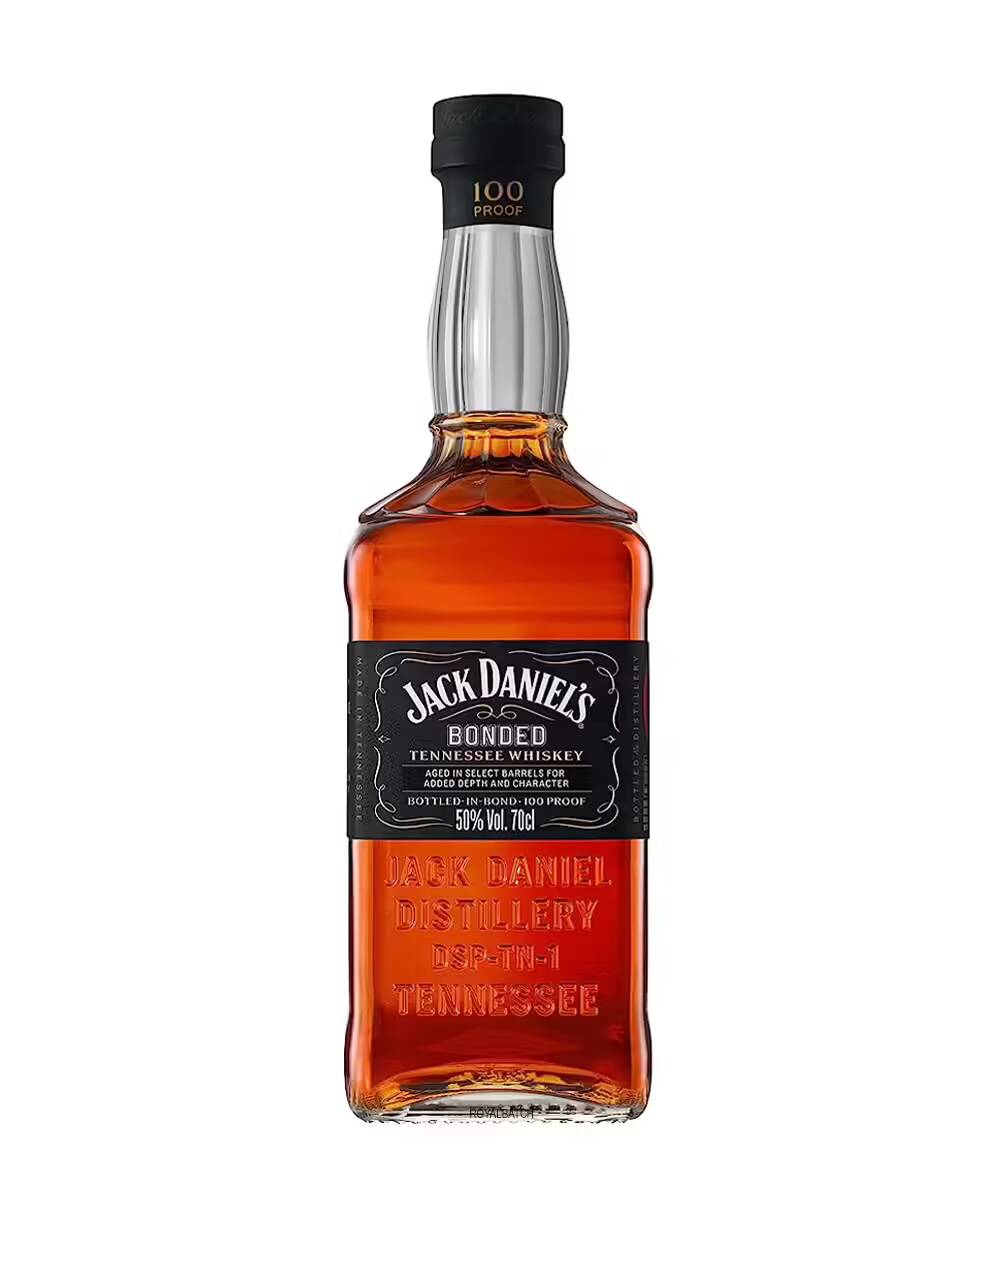 Jack Daniels Bonded Tennessee Whiskey 1L